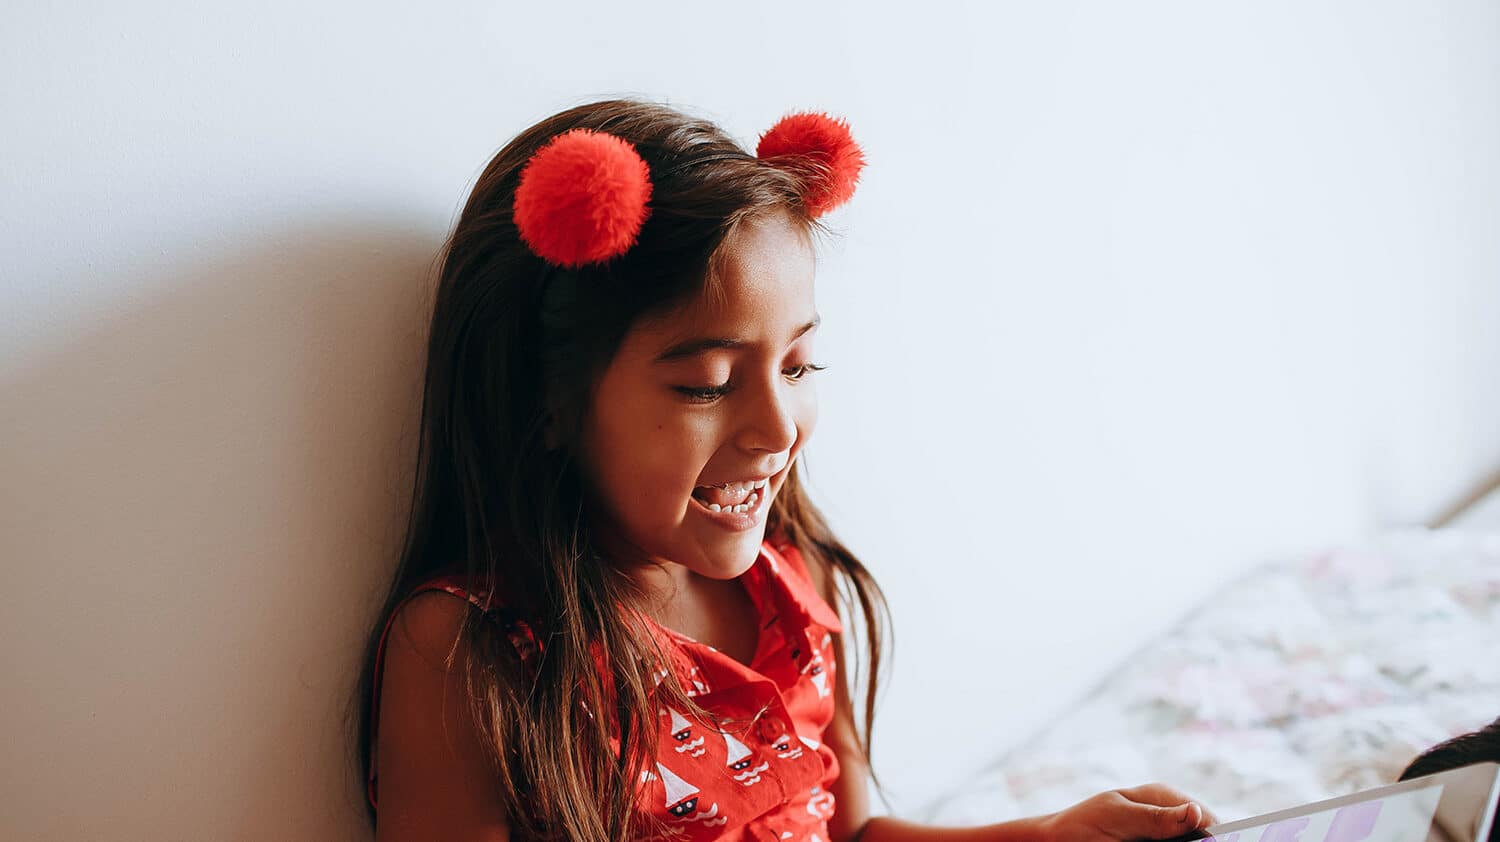 a girl with long brown hair and wearing a red shirt looks at her ipad and smiles